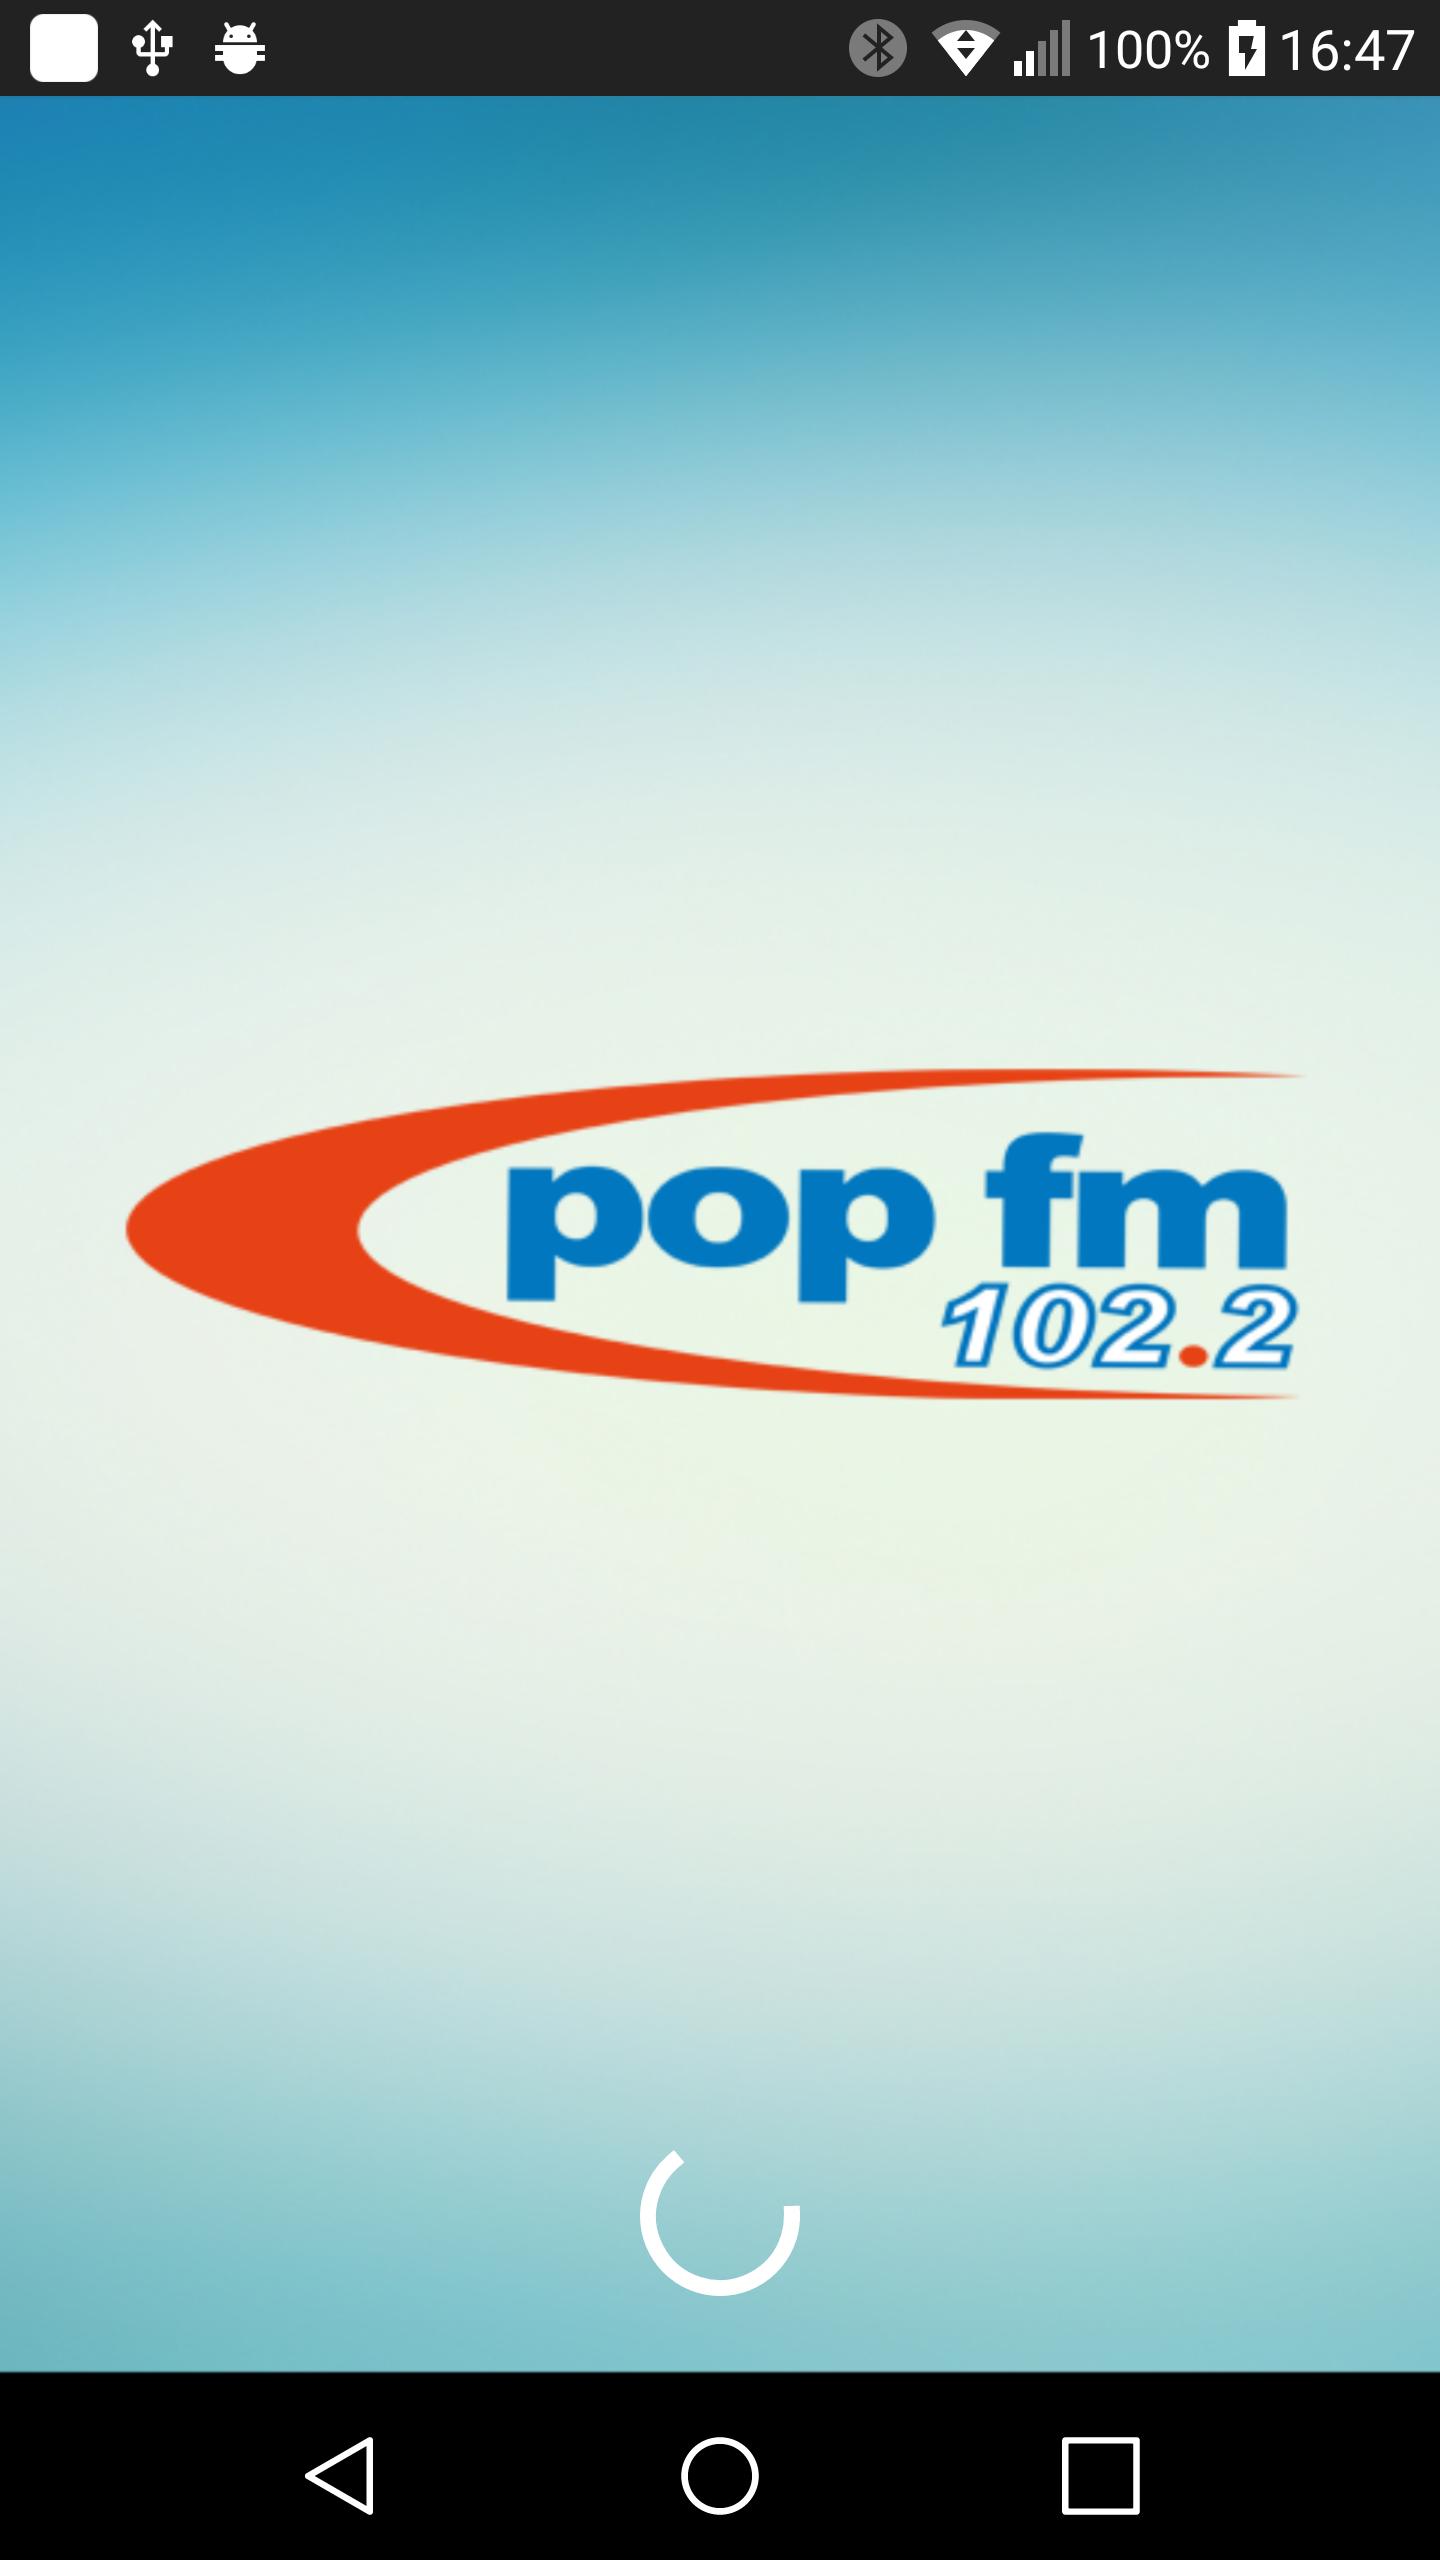 POP FM 102.2 for Android - APK Download